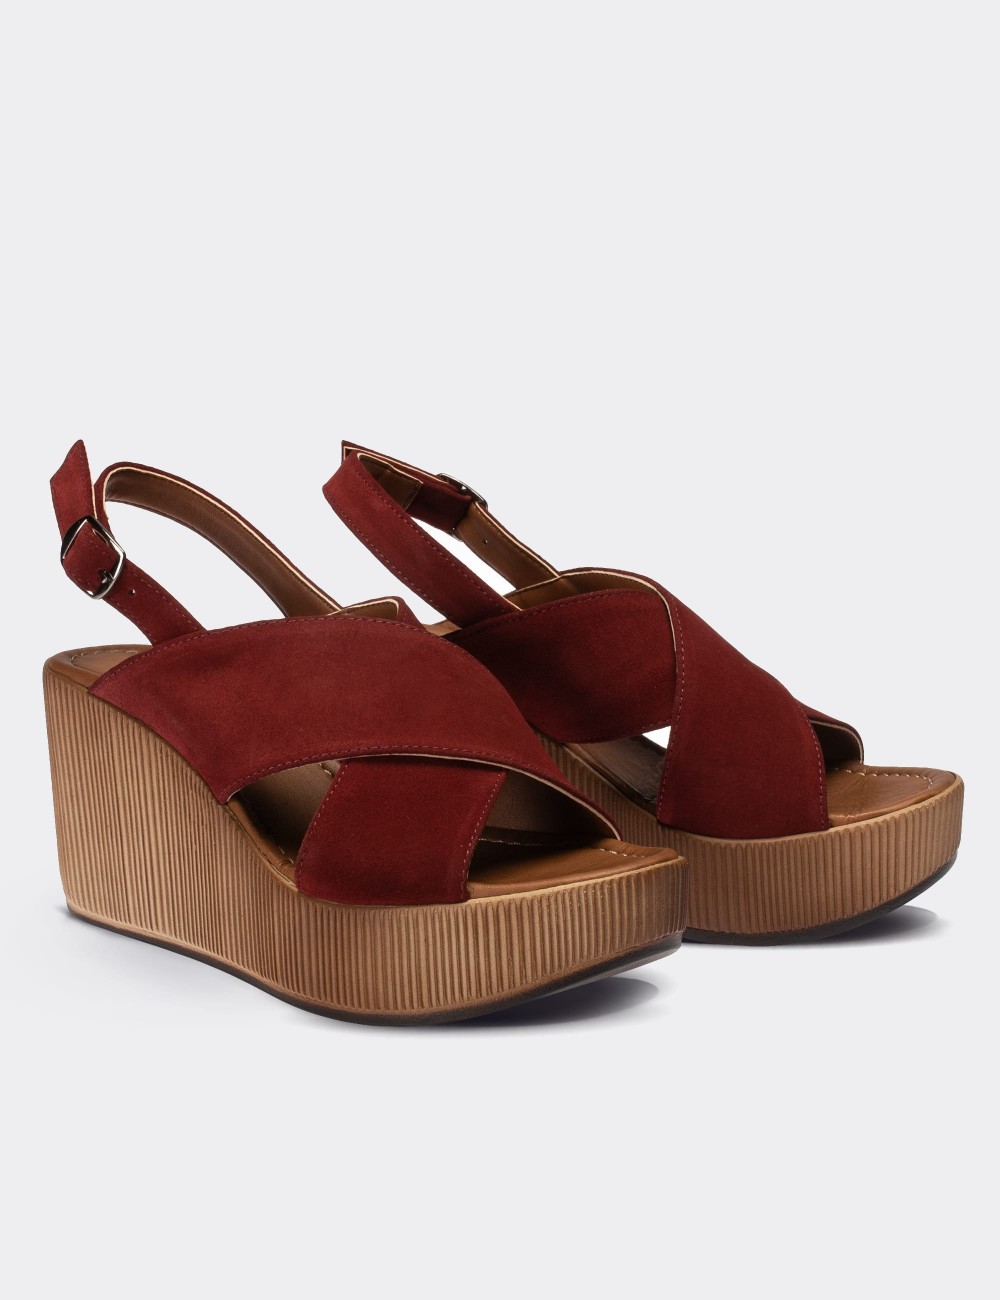 Burgundy Suede Leather Sandals - E6174ZBRDC02